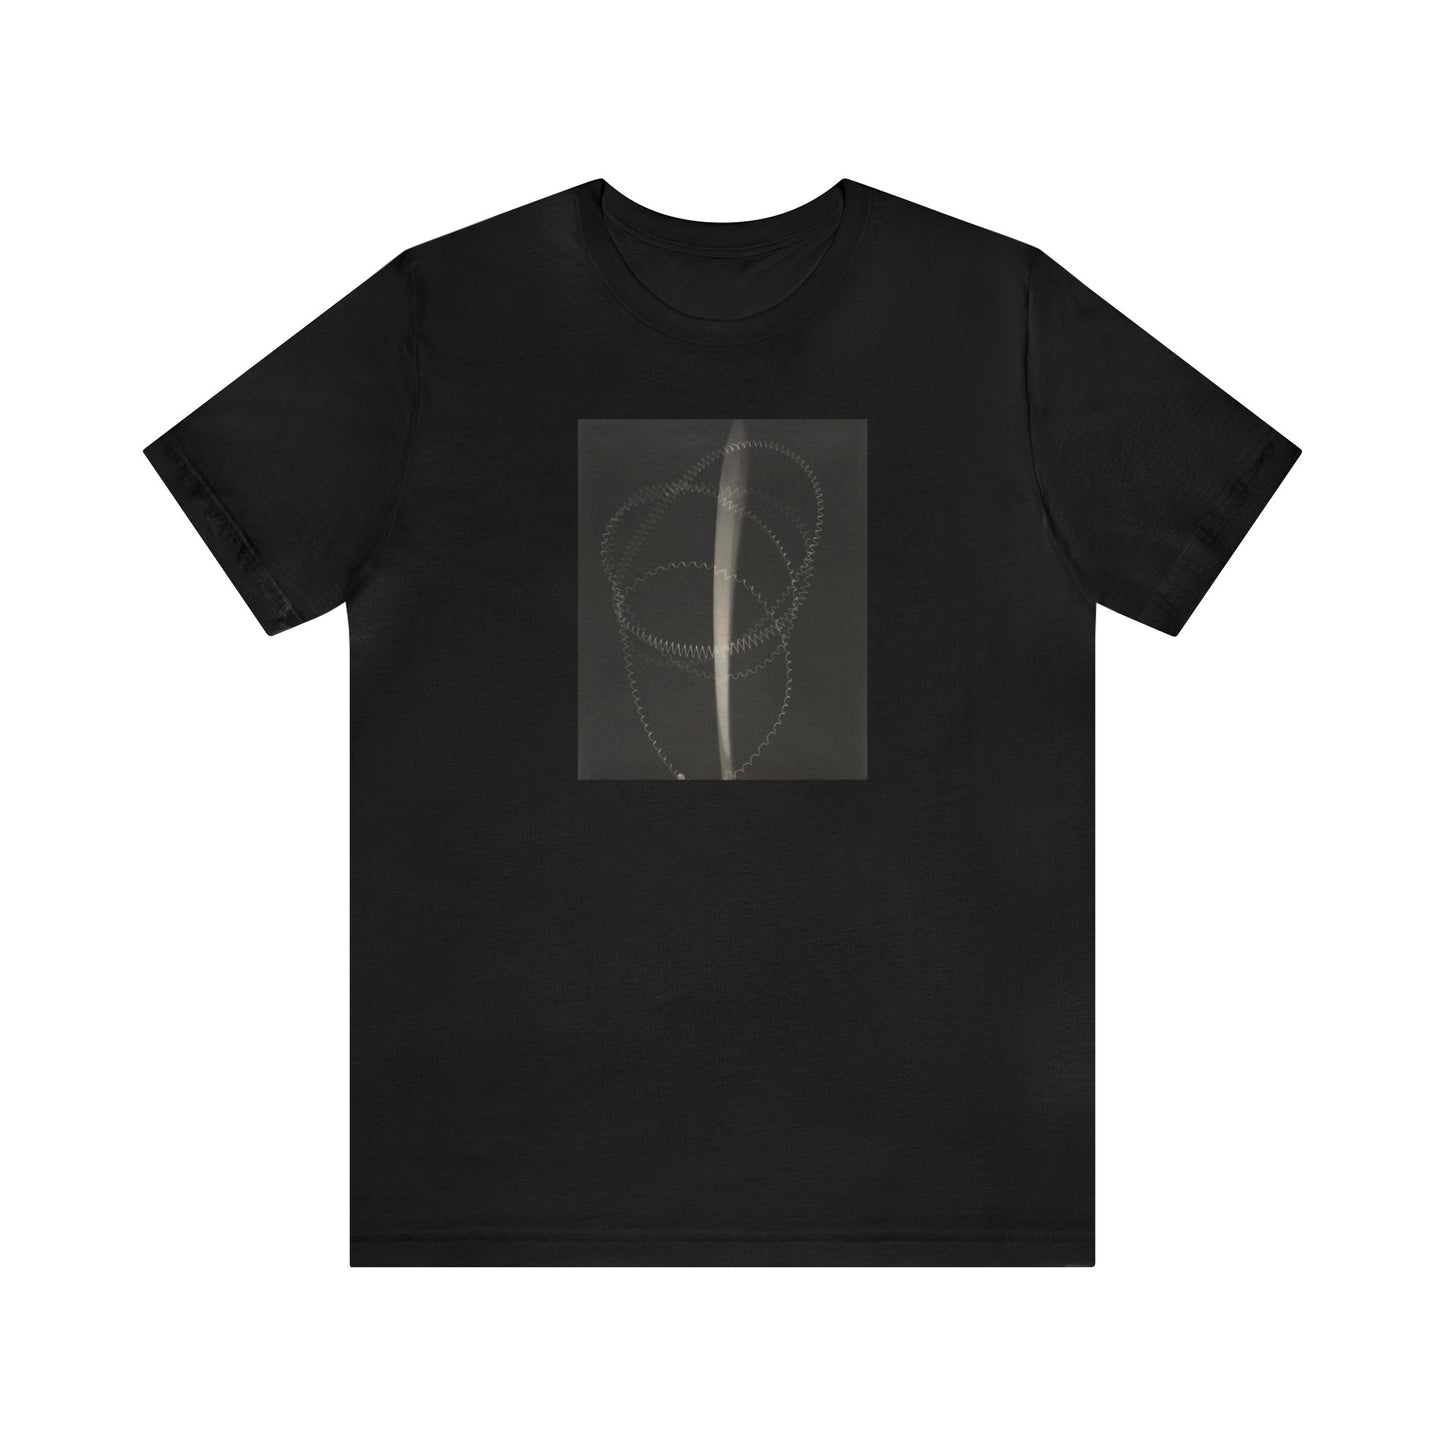 MAN RAY - THE FEATHER - UNISEX JERSEY T-SHIRTMAN RAY - THE FEATHER - UNISEX JERSEY T-SHIRT